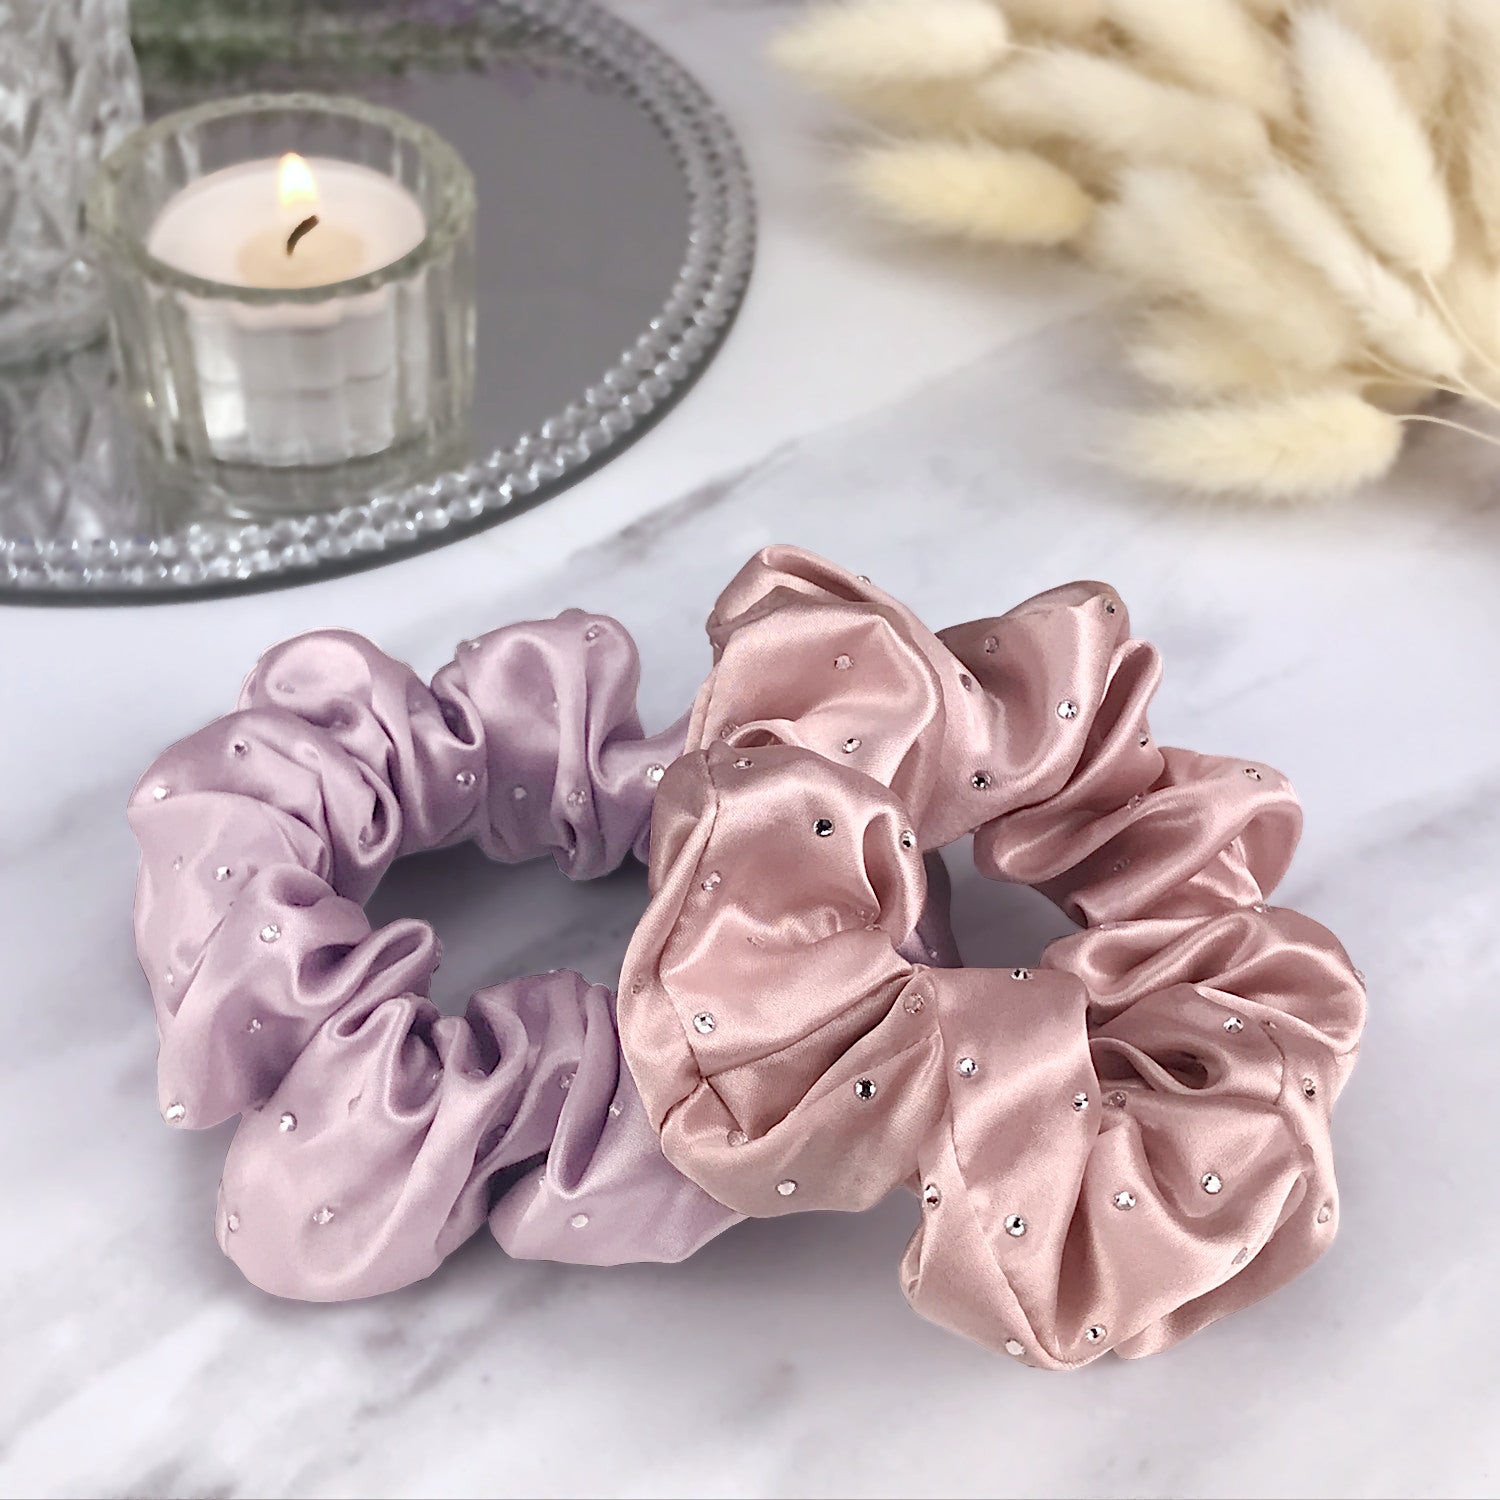 Celestial Silk scrunchies with crystals, silk hair ties with rhinestones pink and purple silk hair scrunchies on marble with candle and mirror tray